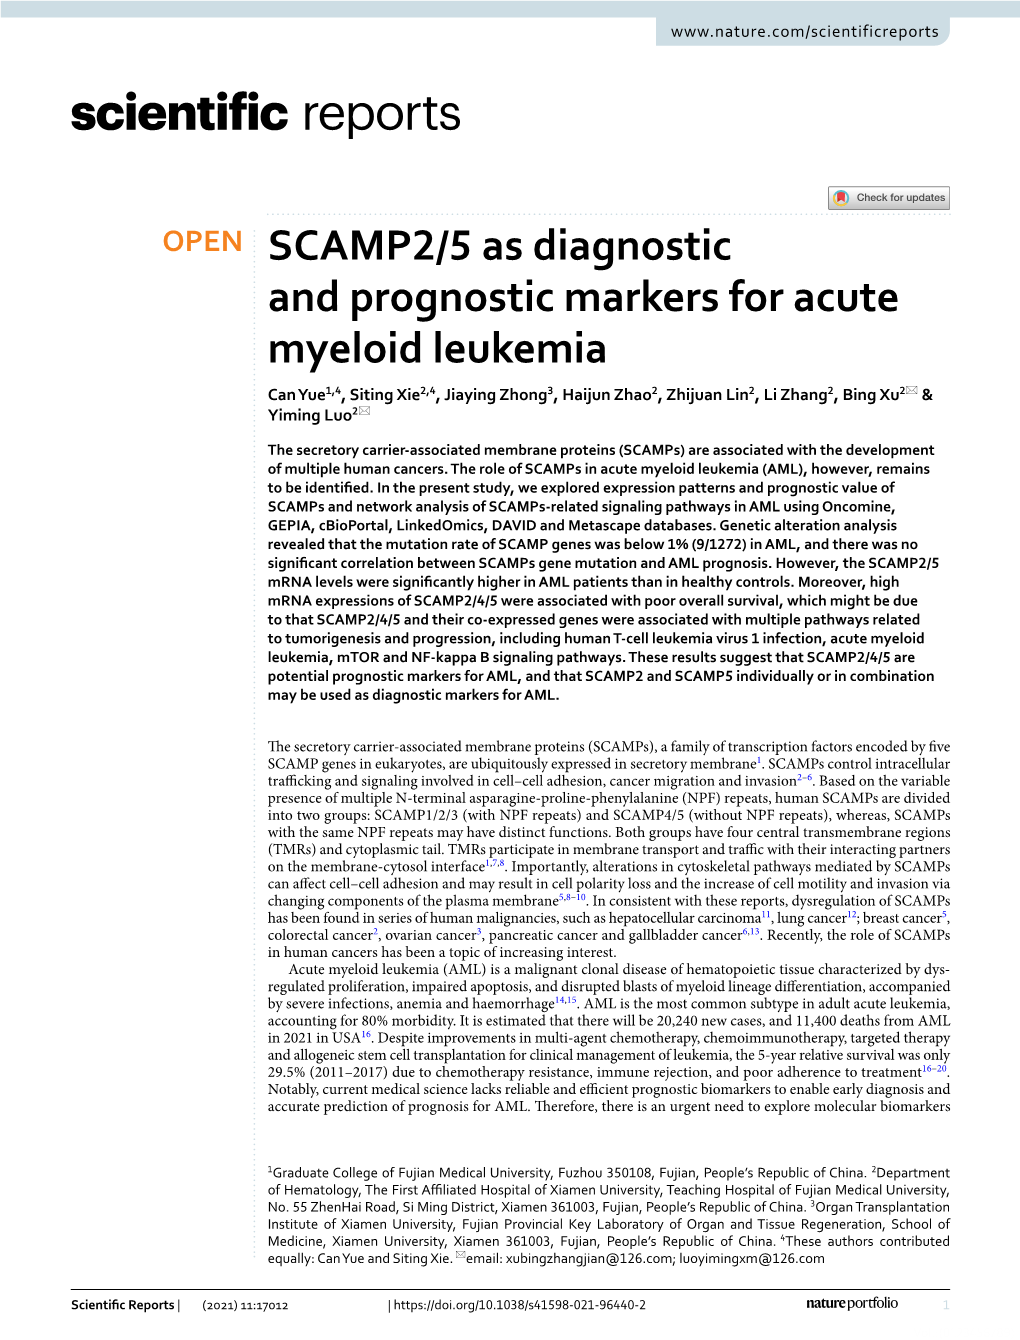 SCAMP2/5 As Diagnostic and Prognostic Markers for Acute